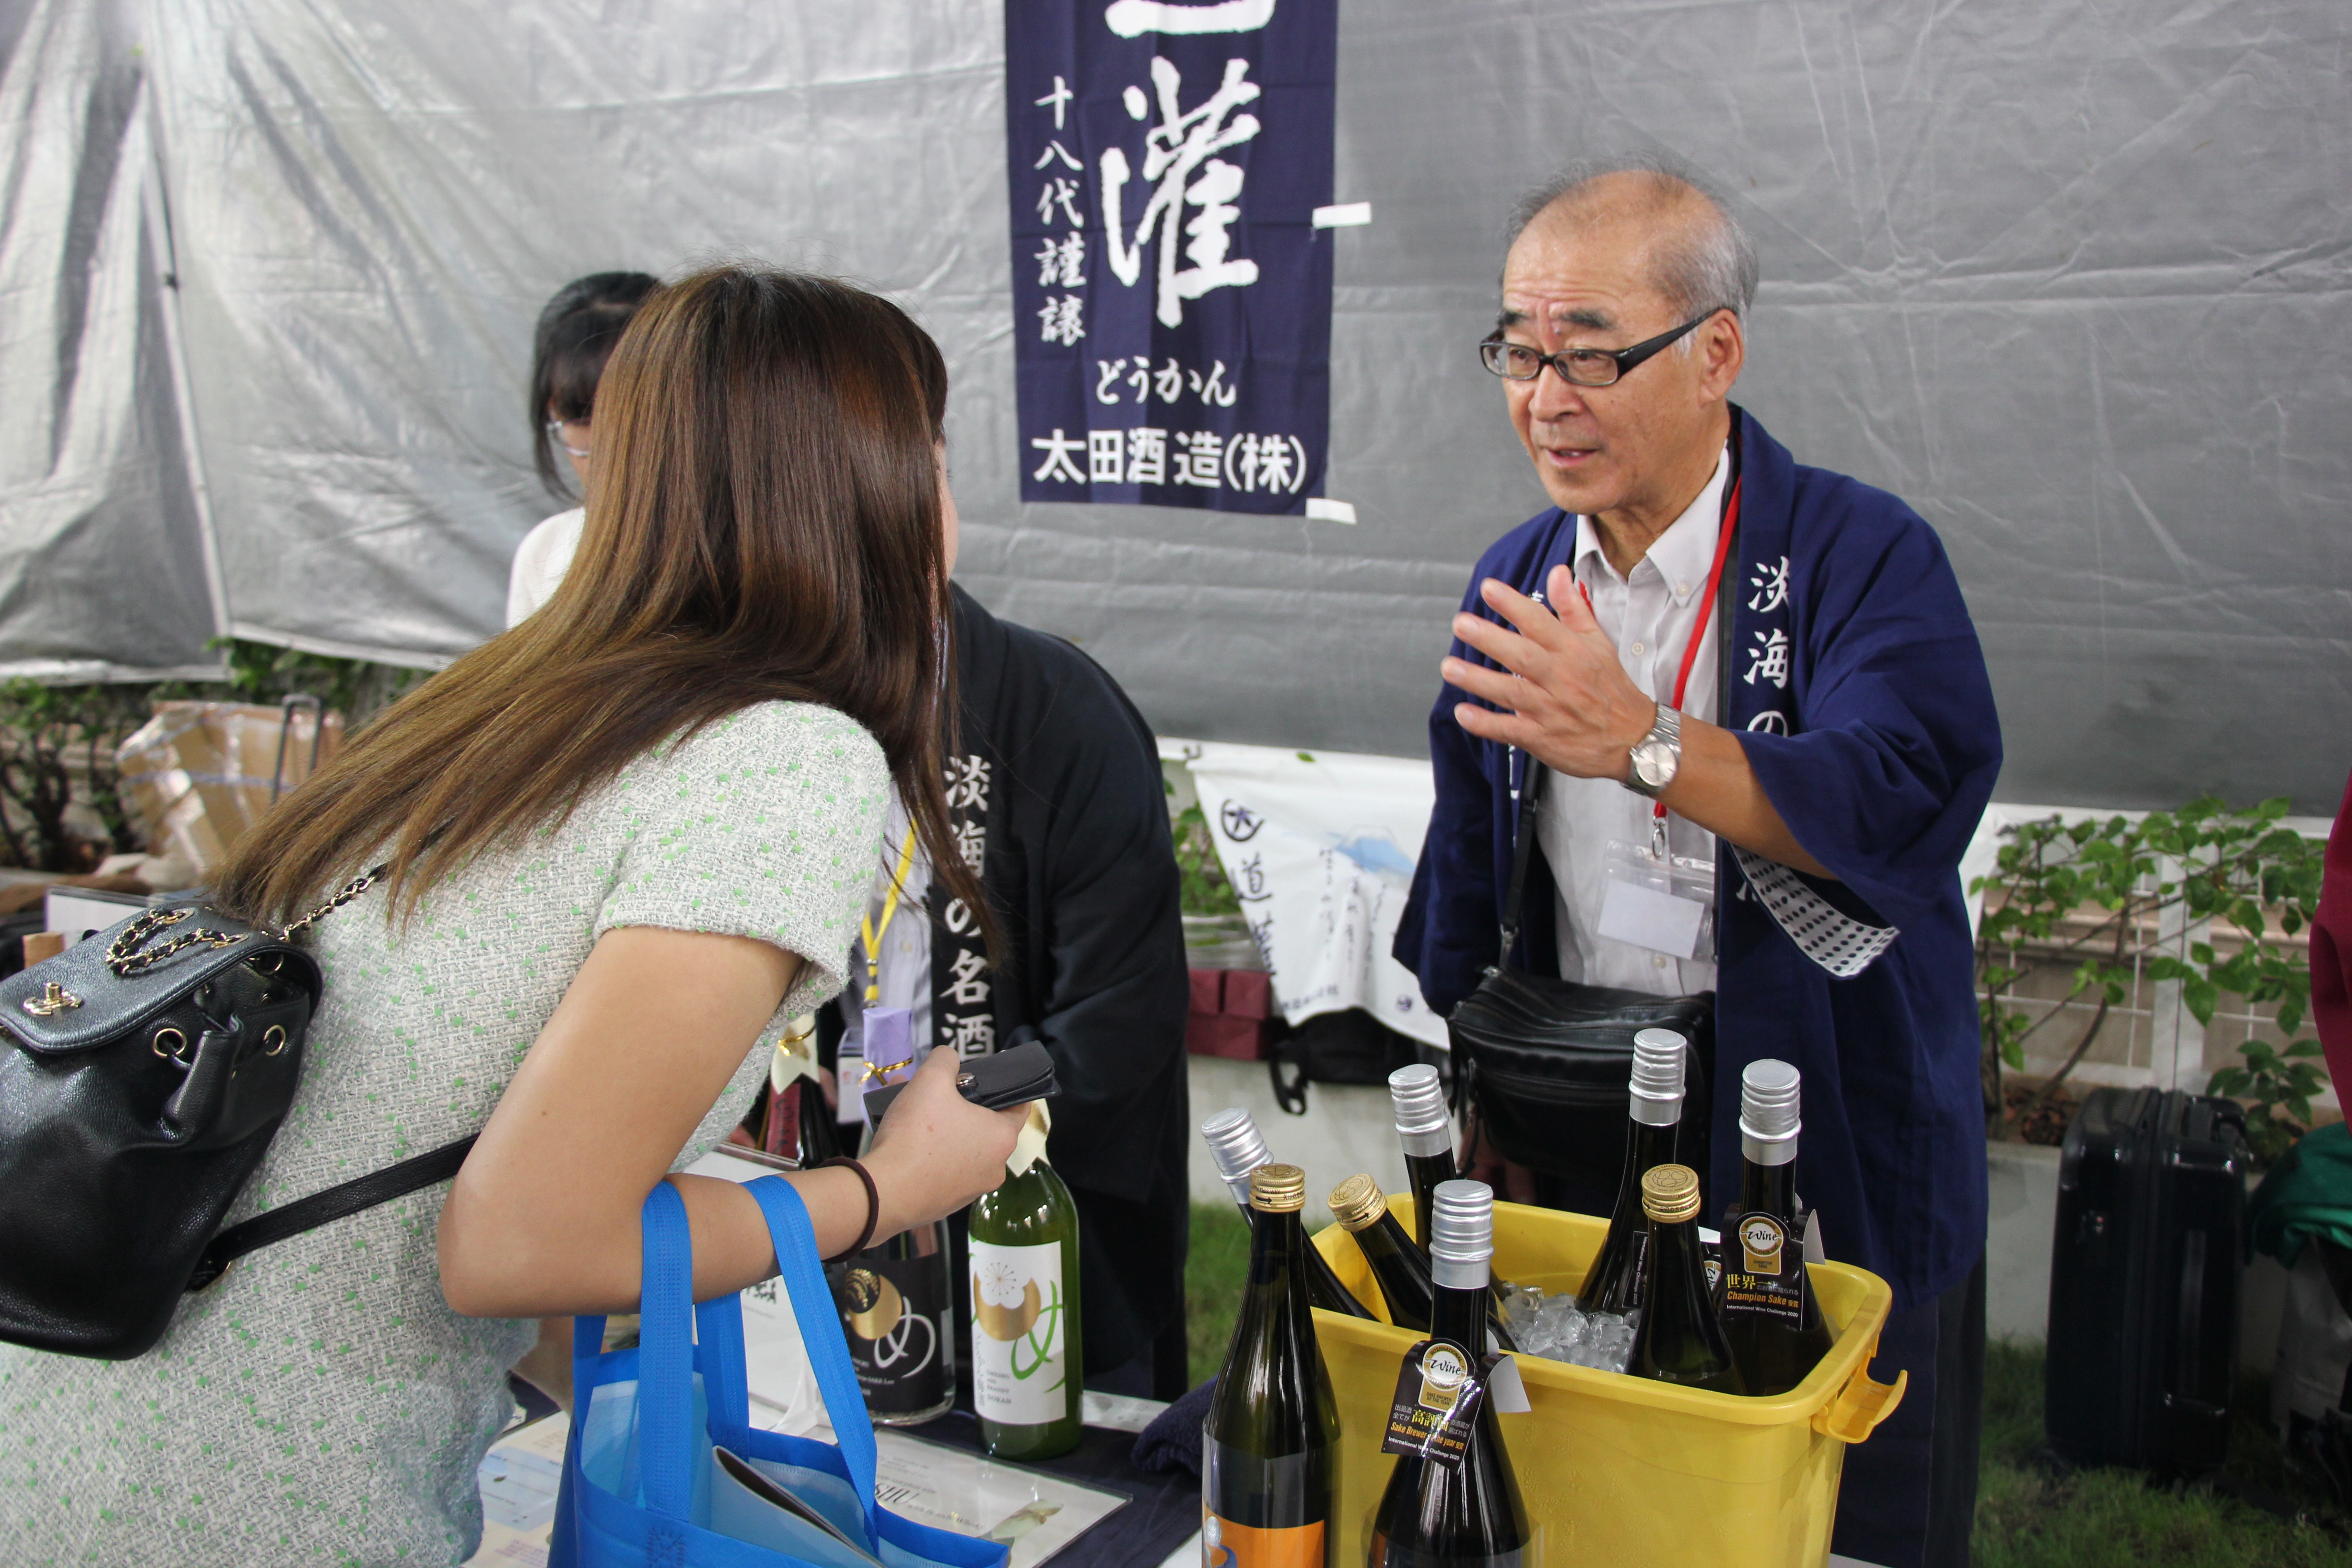 A representative of OTA Shuzou Co. Ltd., one of the 30 breweries introducing sake at the event, introduces his company’s products to a visitor. Photo: Ngoc Dong / Tuoi Tre News